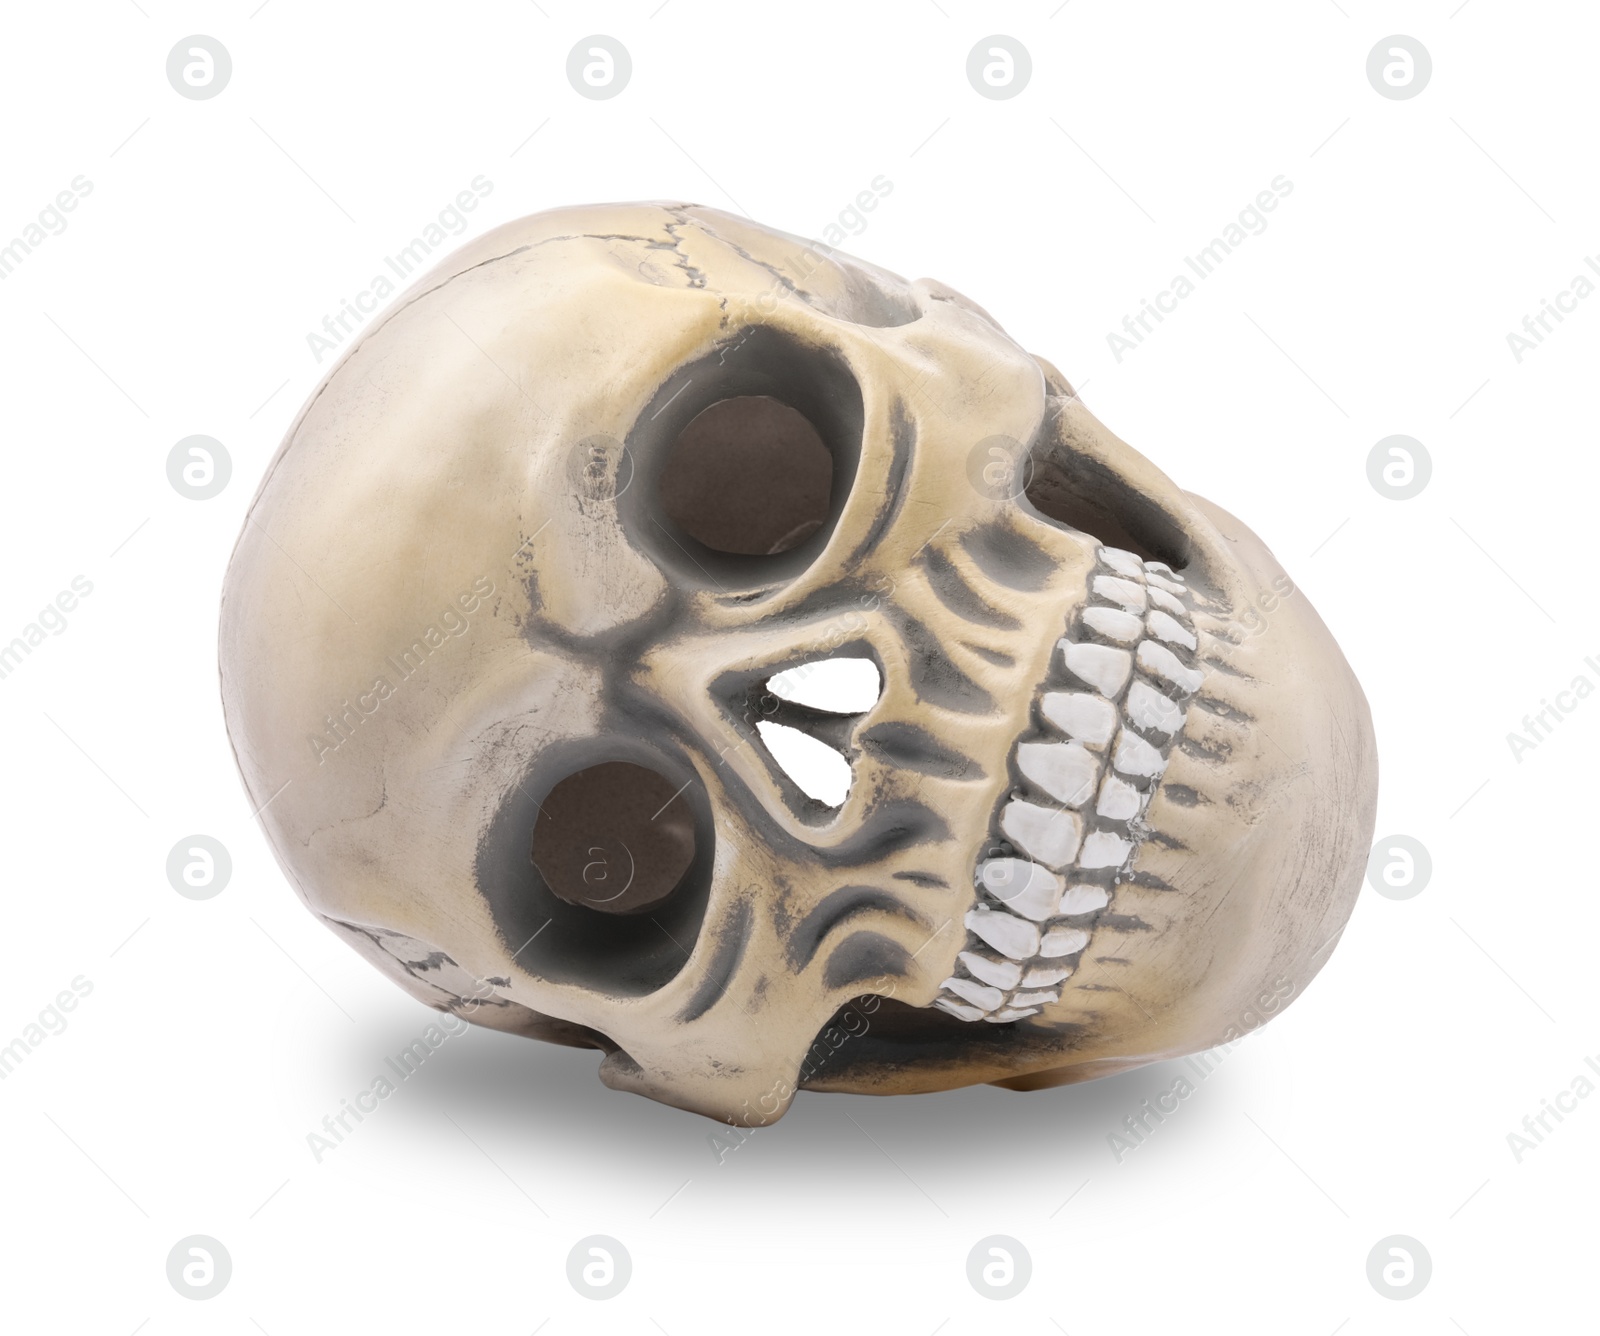 Photo of Human skull with teeth isolated on white